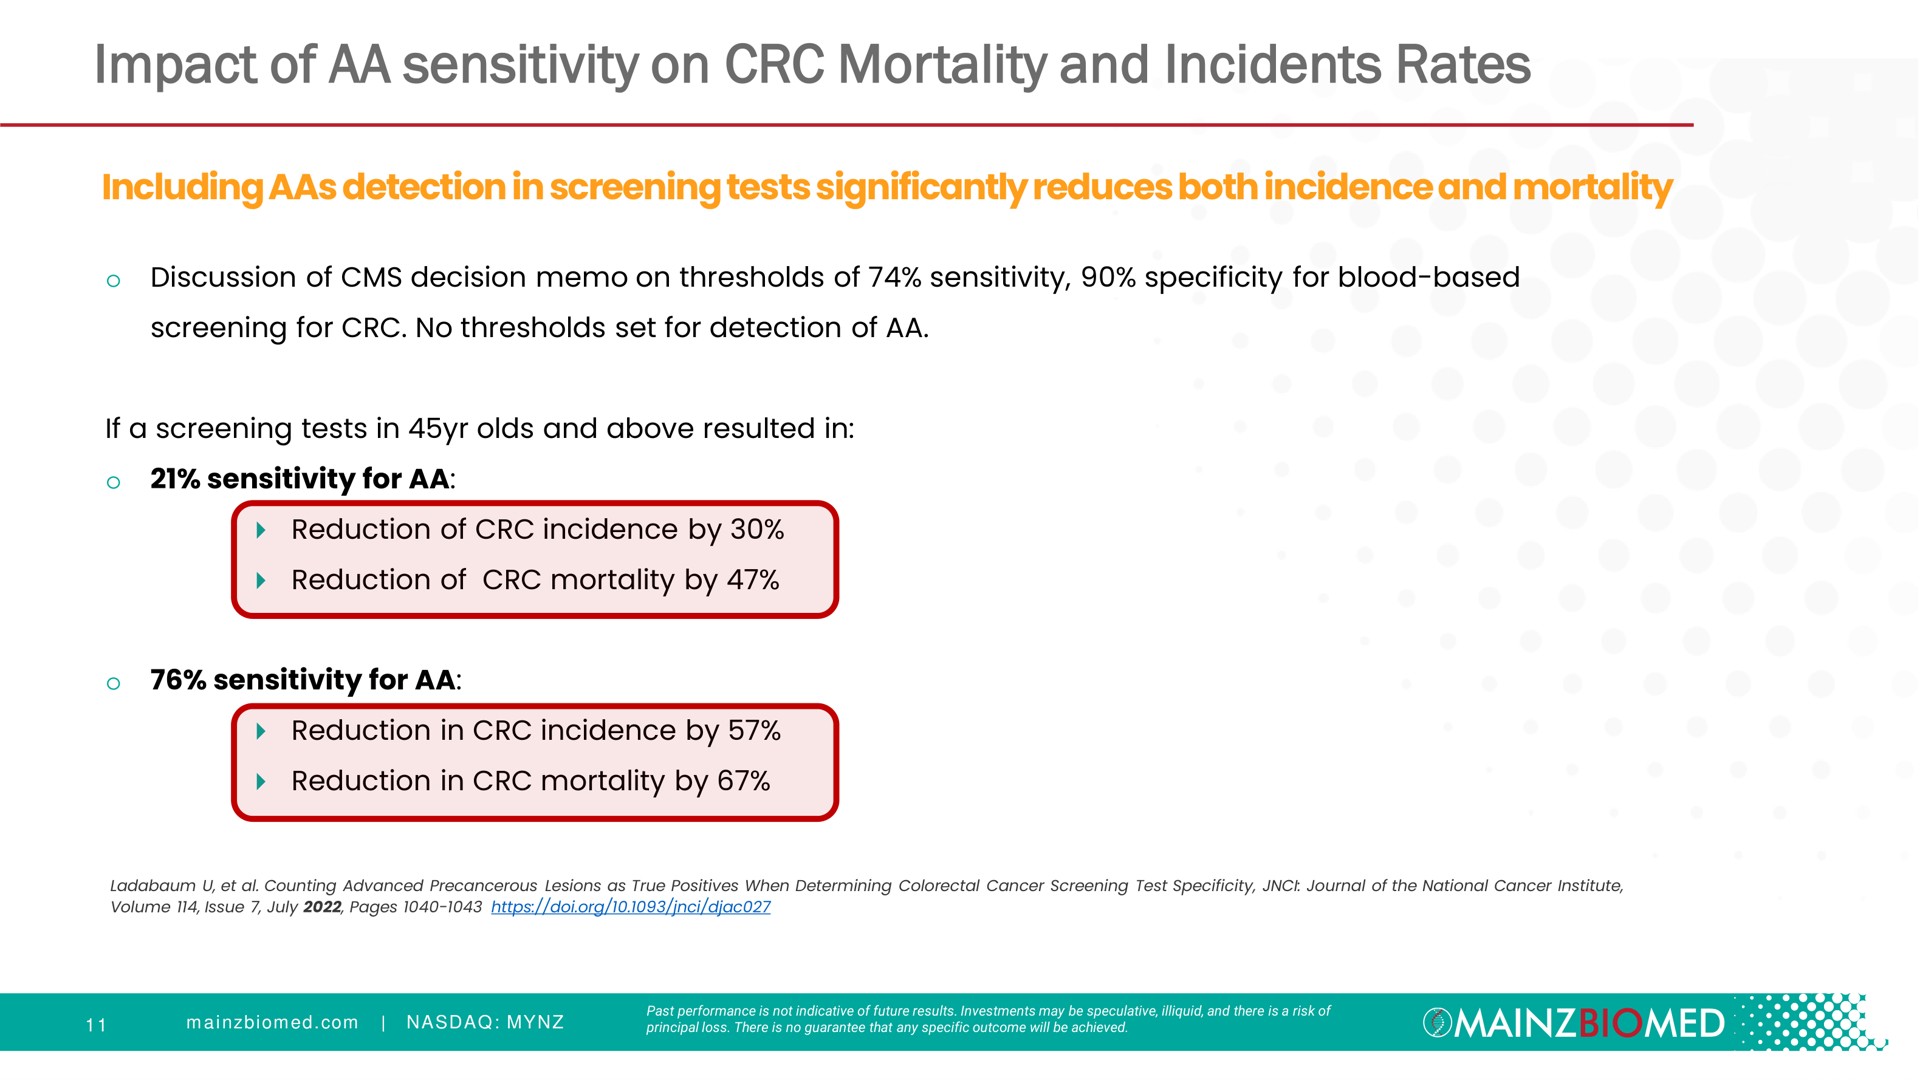 impact of sensitivity on mortality and incidents rates | Mainz Biomed NV